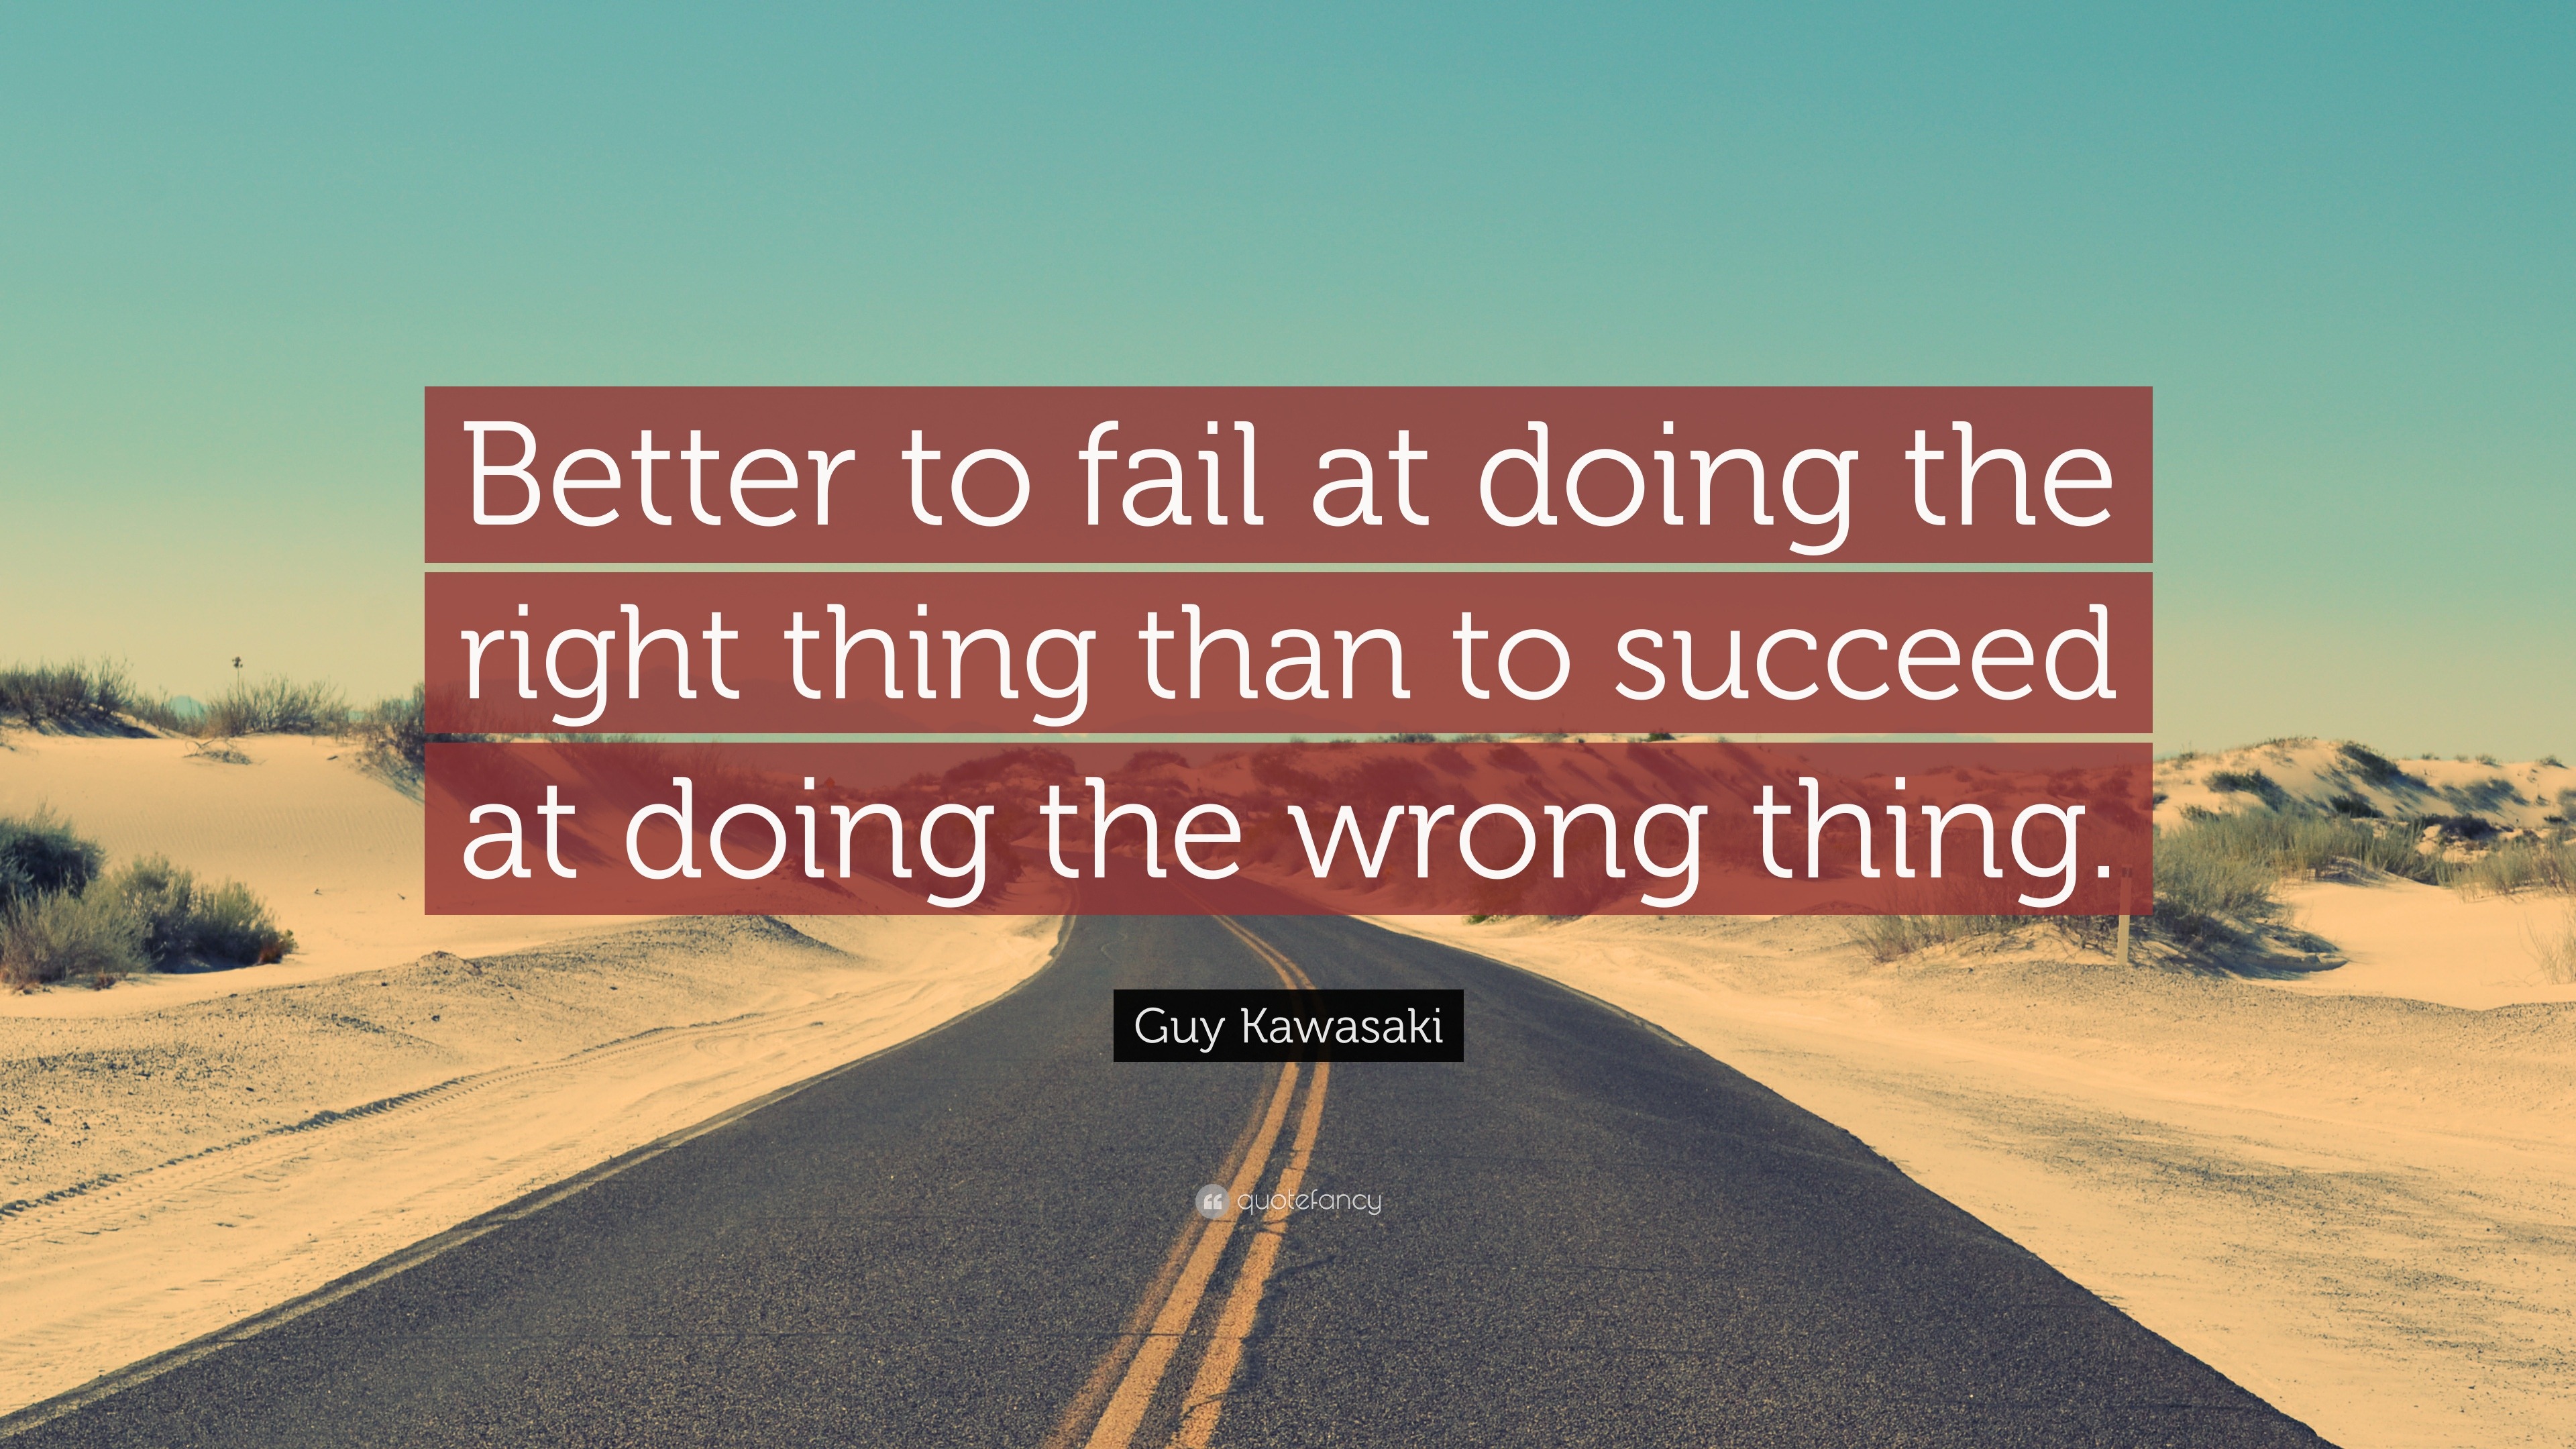 Guy Kawasaki Quote: “Better to fail at doing the right thing than to ...